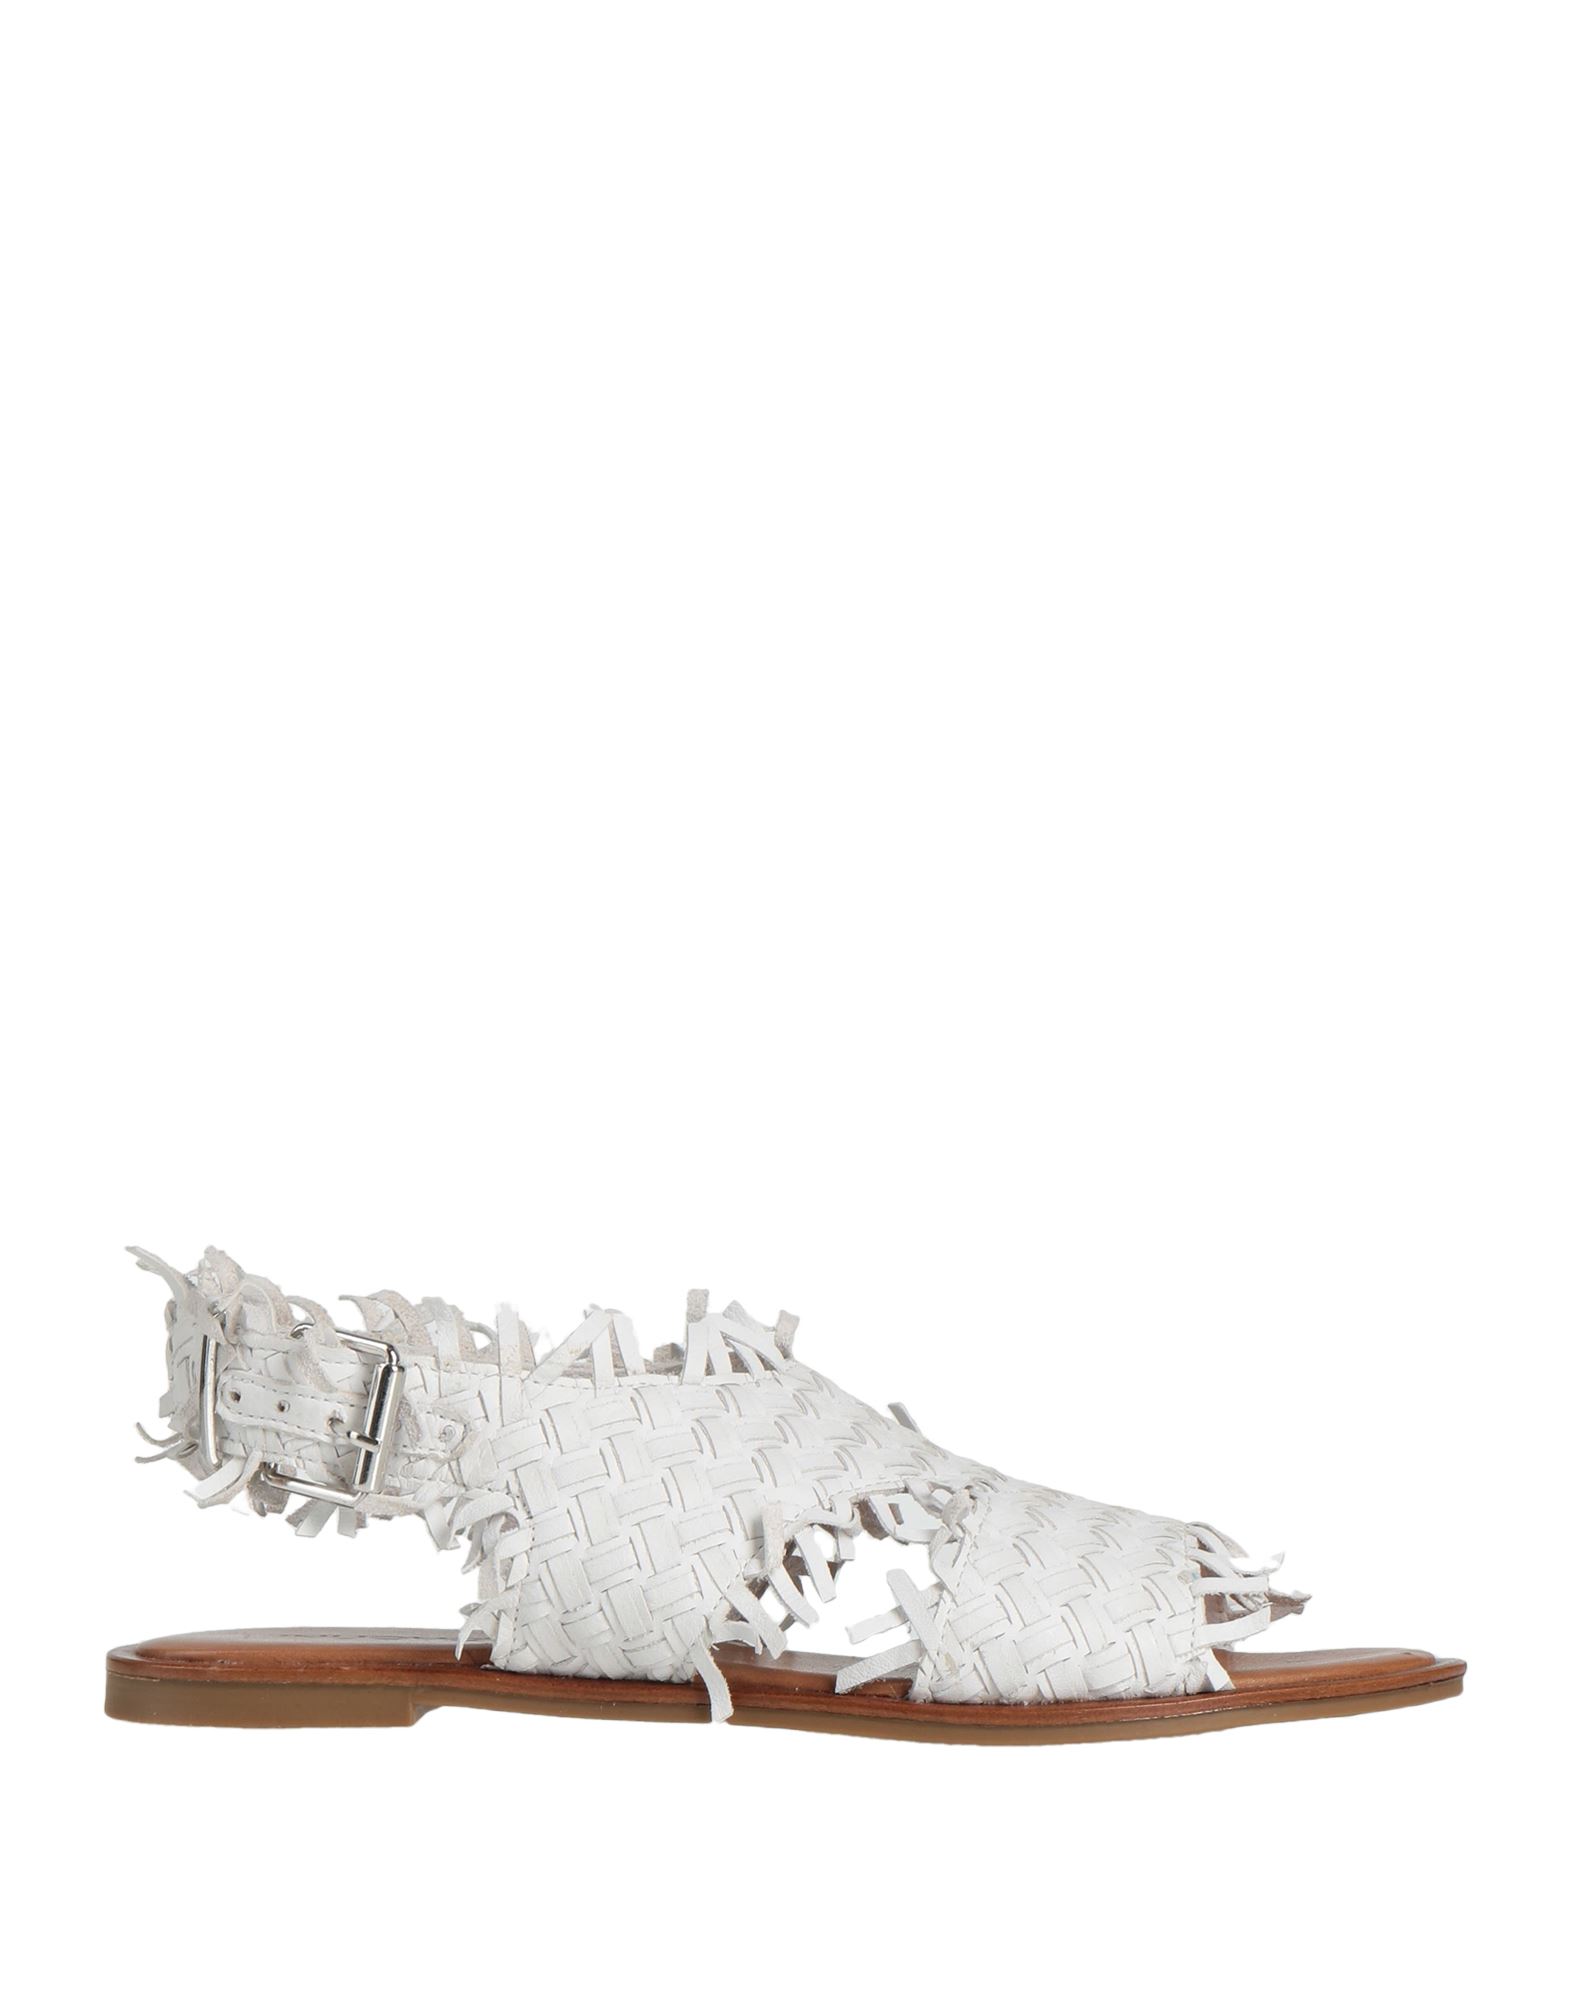 Inuovo Sandals In White